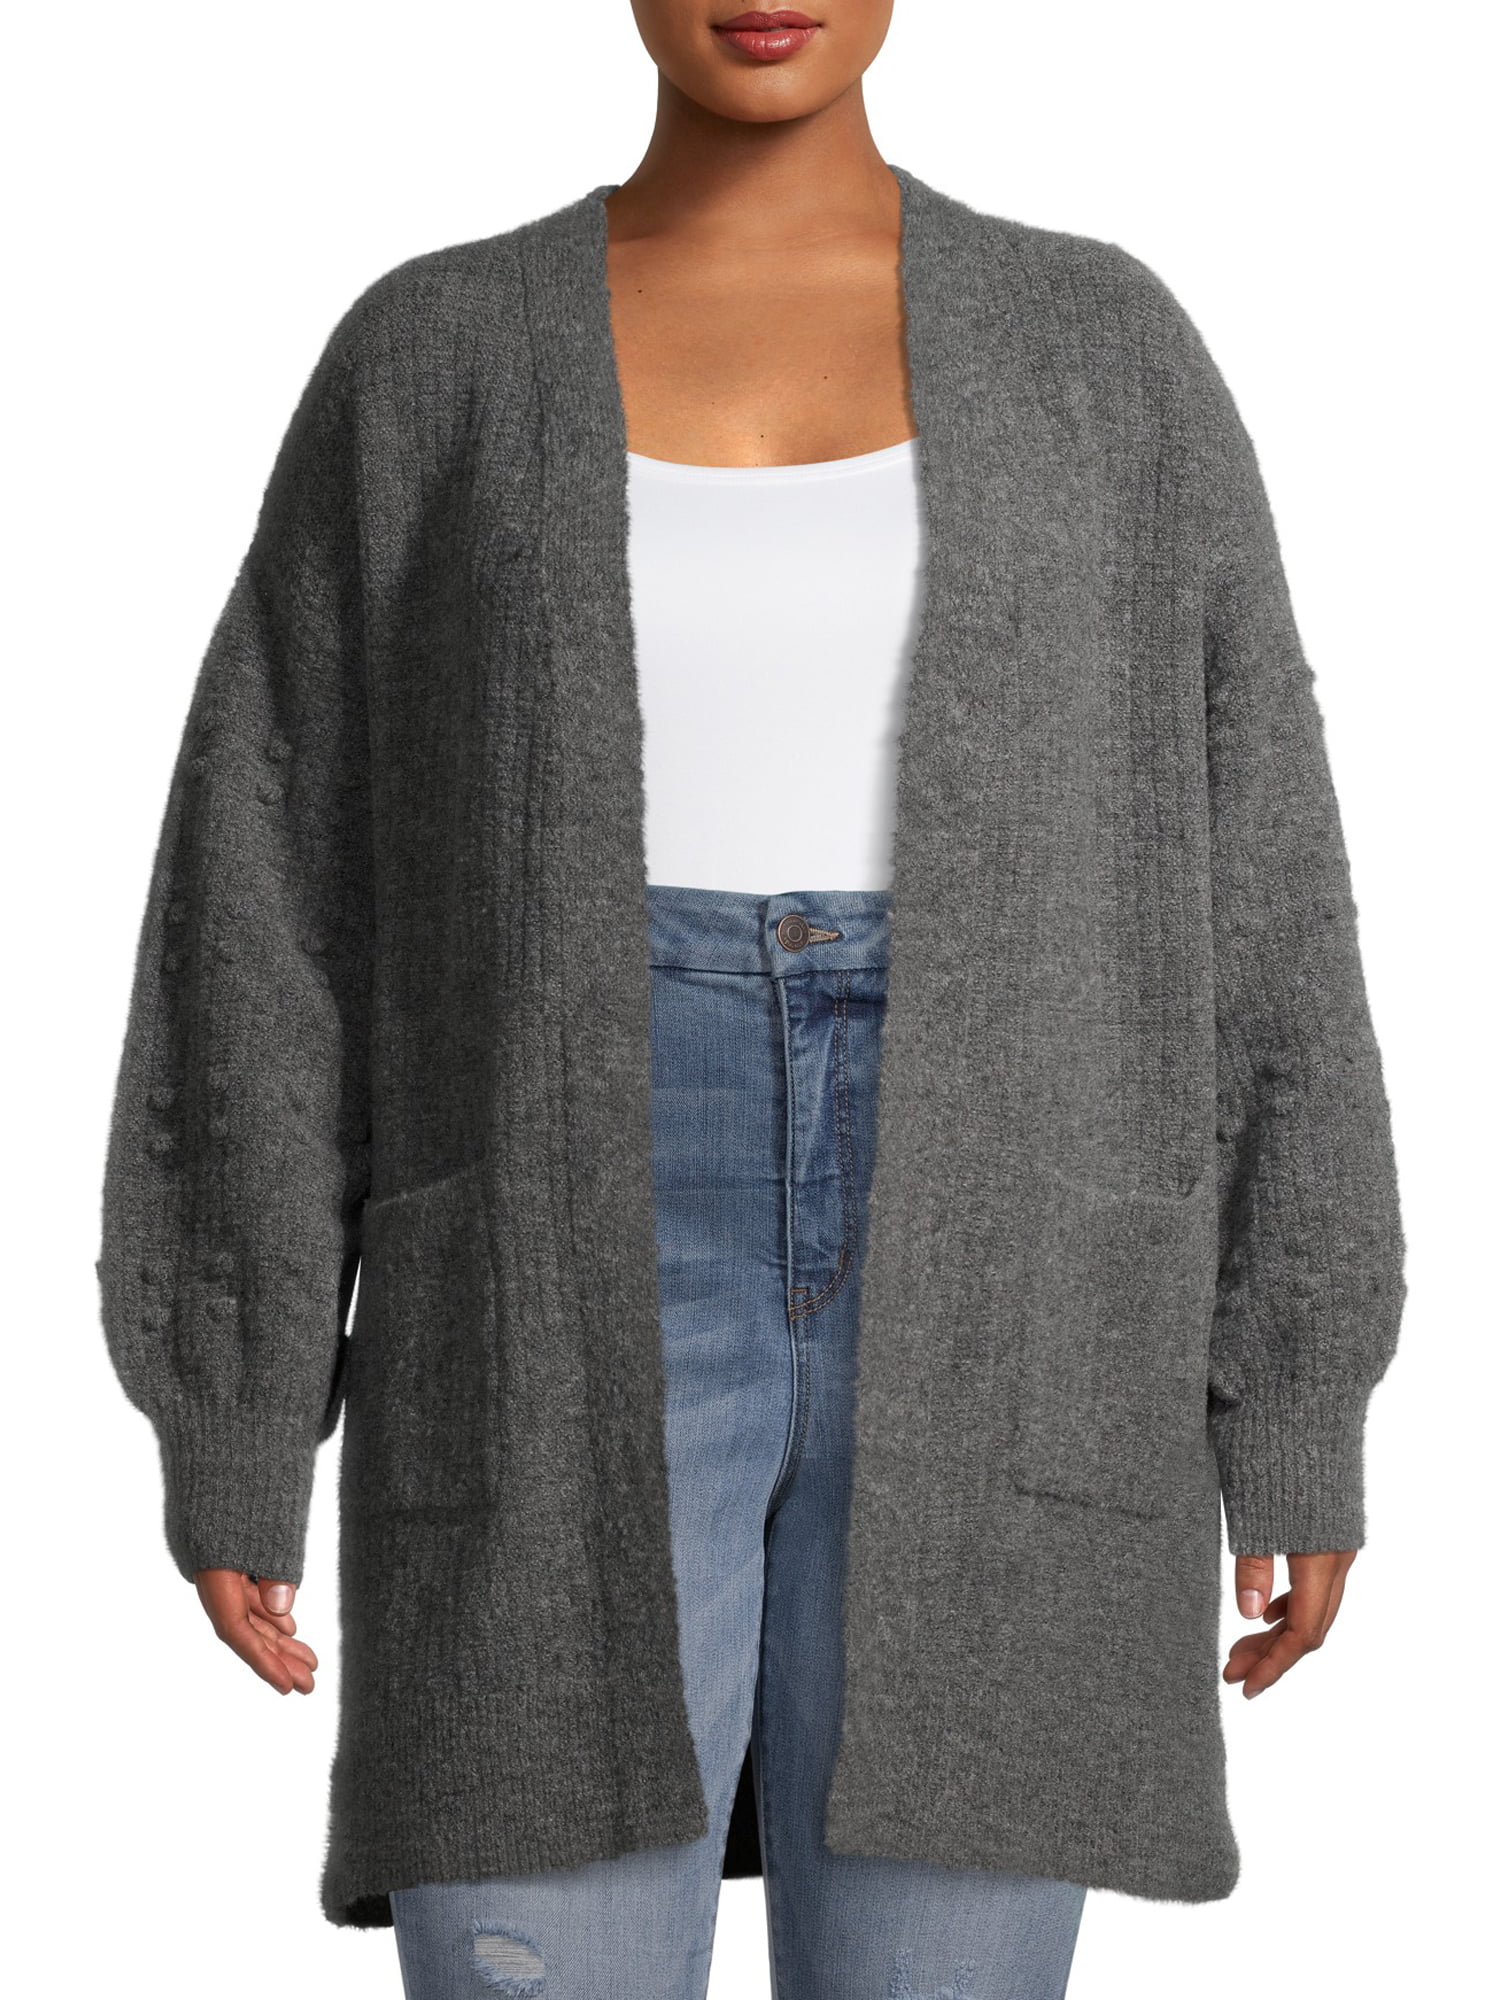 Terra & Sky Women's Plus Size Open-Front Super Soft Duster Cardigan with  Popcorn Stitch Sleeves